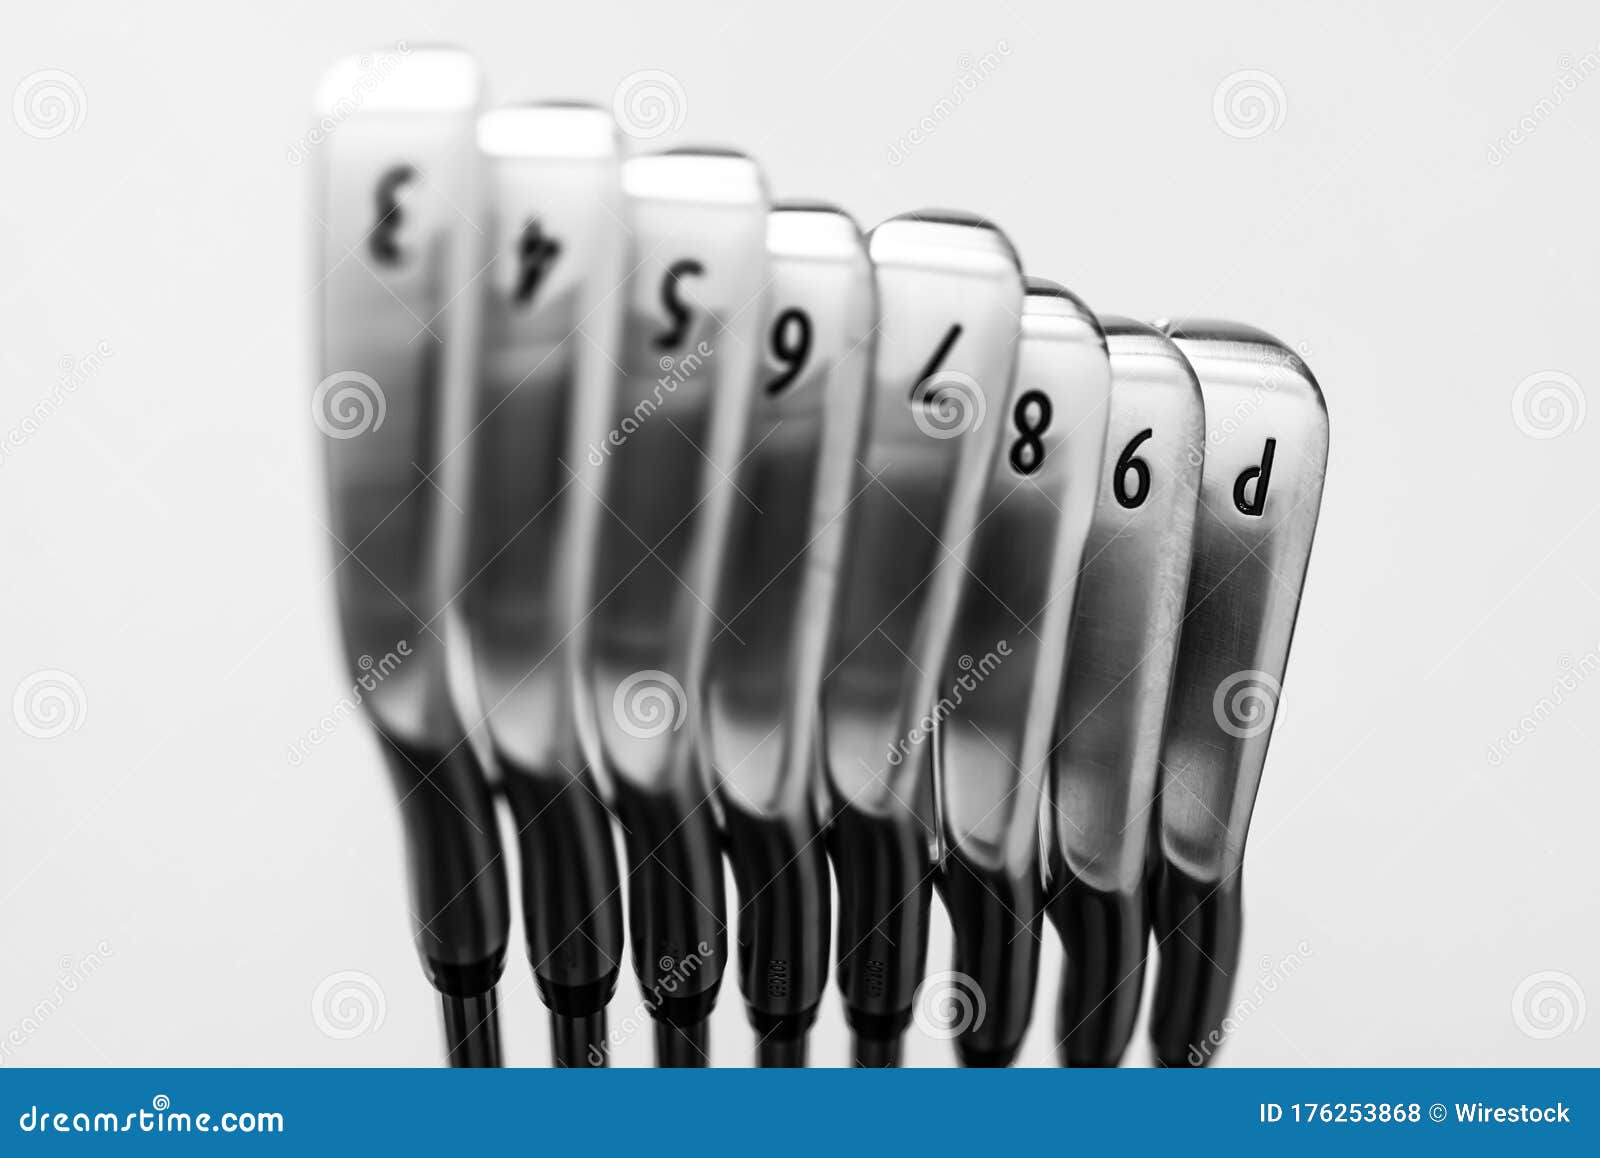 Tænke kok hver Closeup of Golf Clubs with Size Numbers on Them Under the Lights Against a  White Background Stock Photo - Image of isolated, color: 176253868